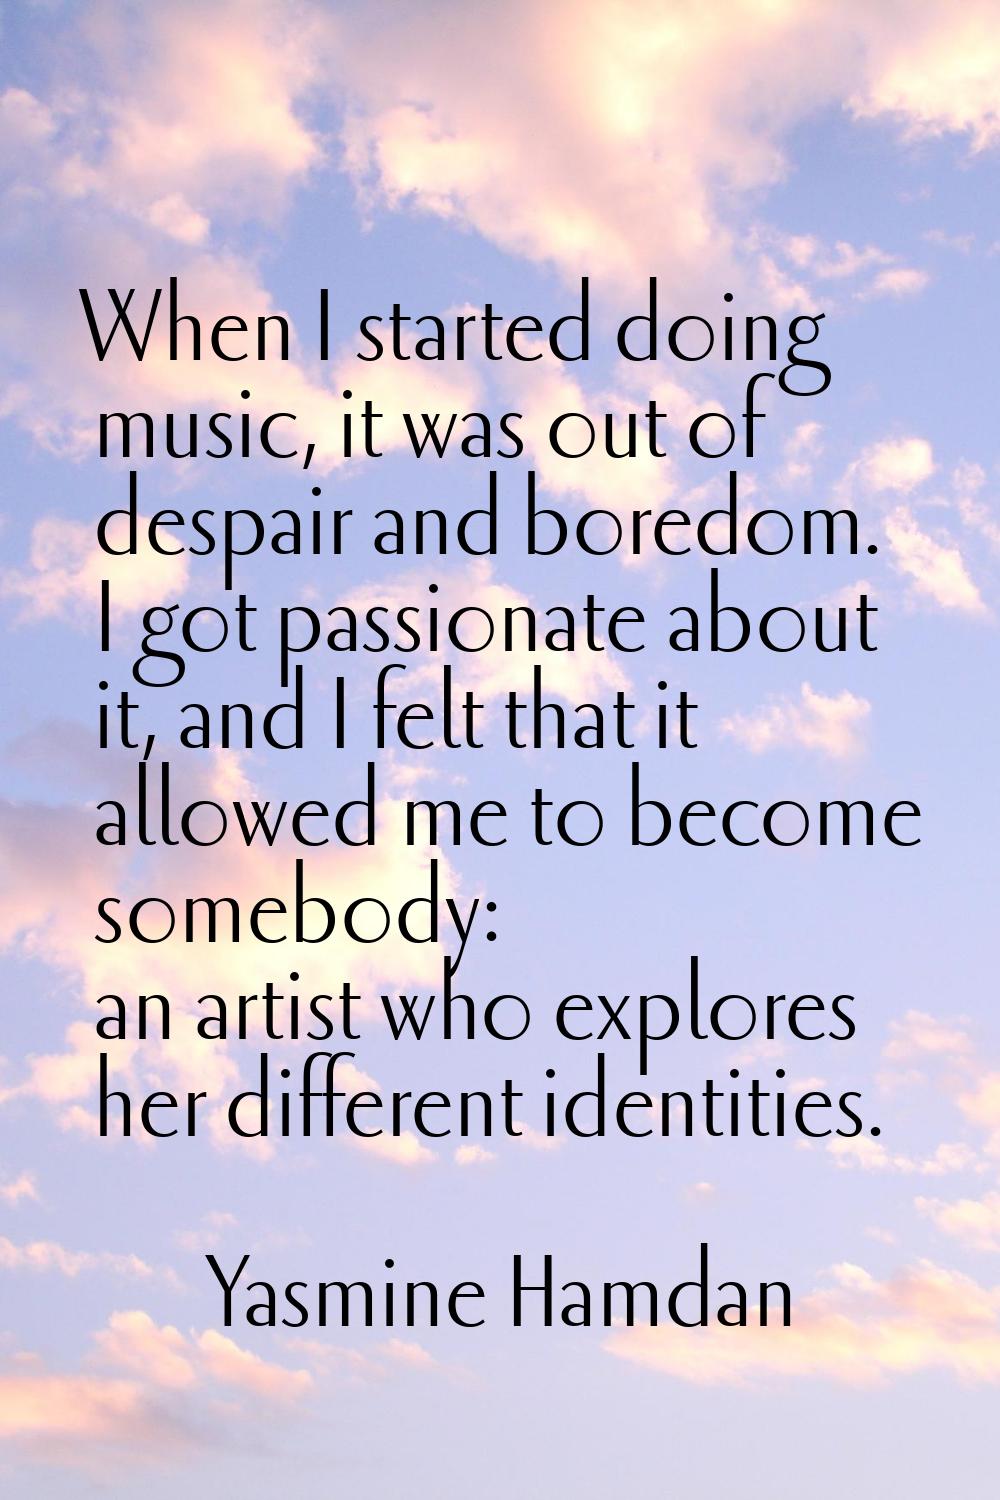 When I started doing music, it was out of despair and boredom. I got passionate about it, and I fel